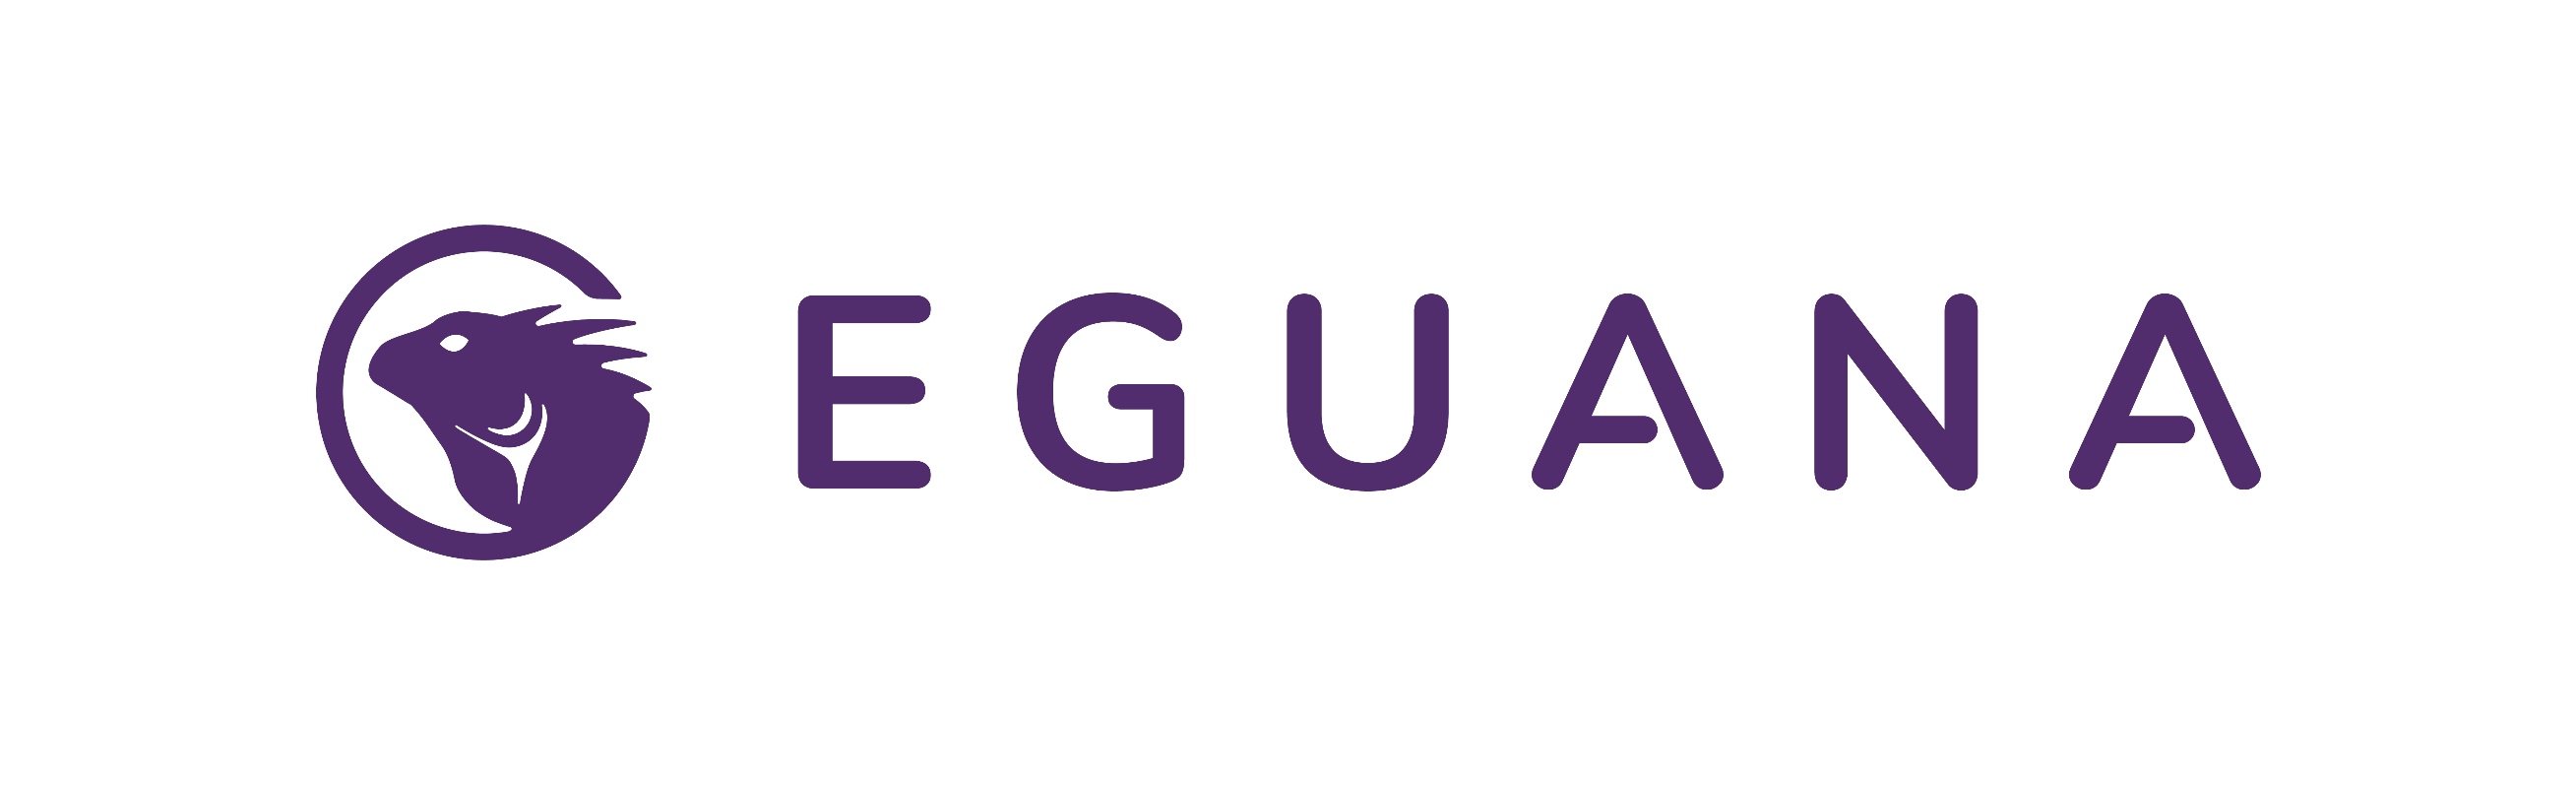 Eguana Launches Utility VPP to Reduce Energy Bills for Australian Consumers